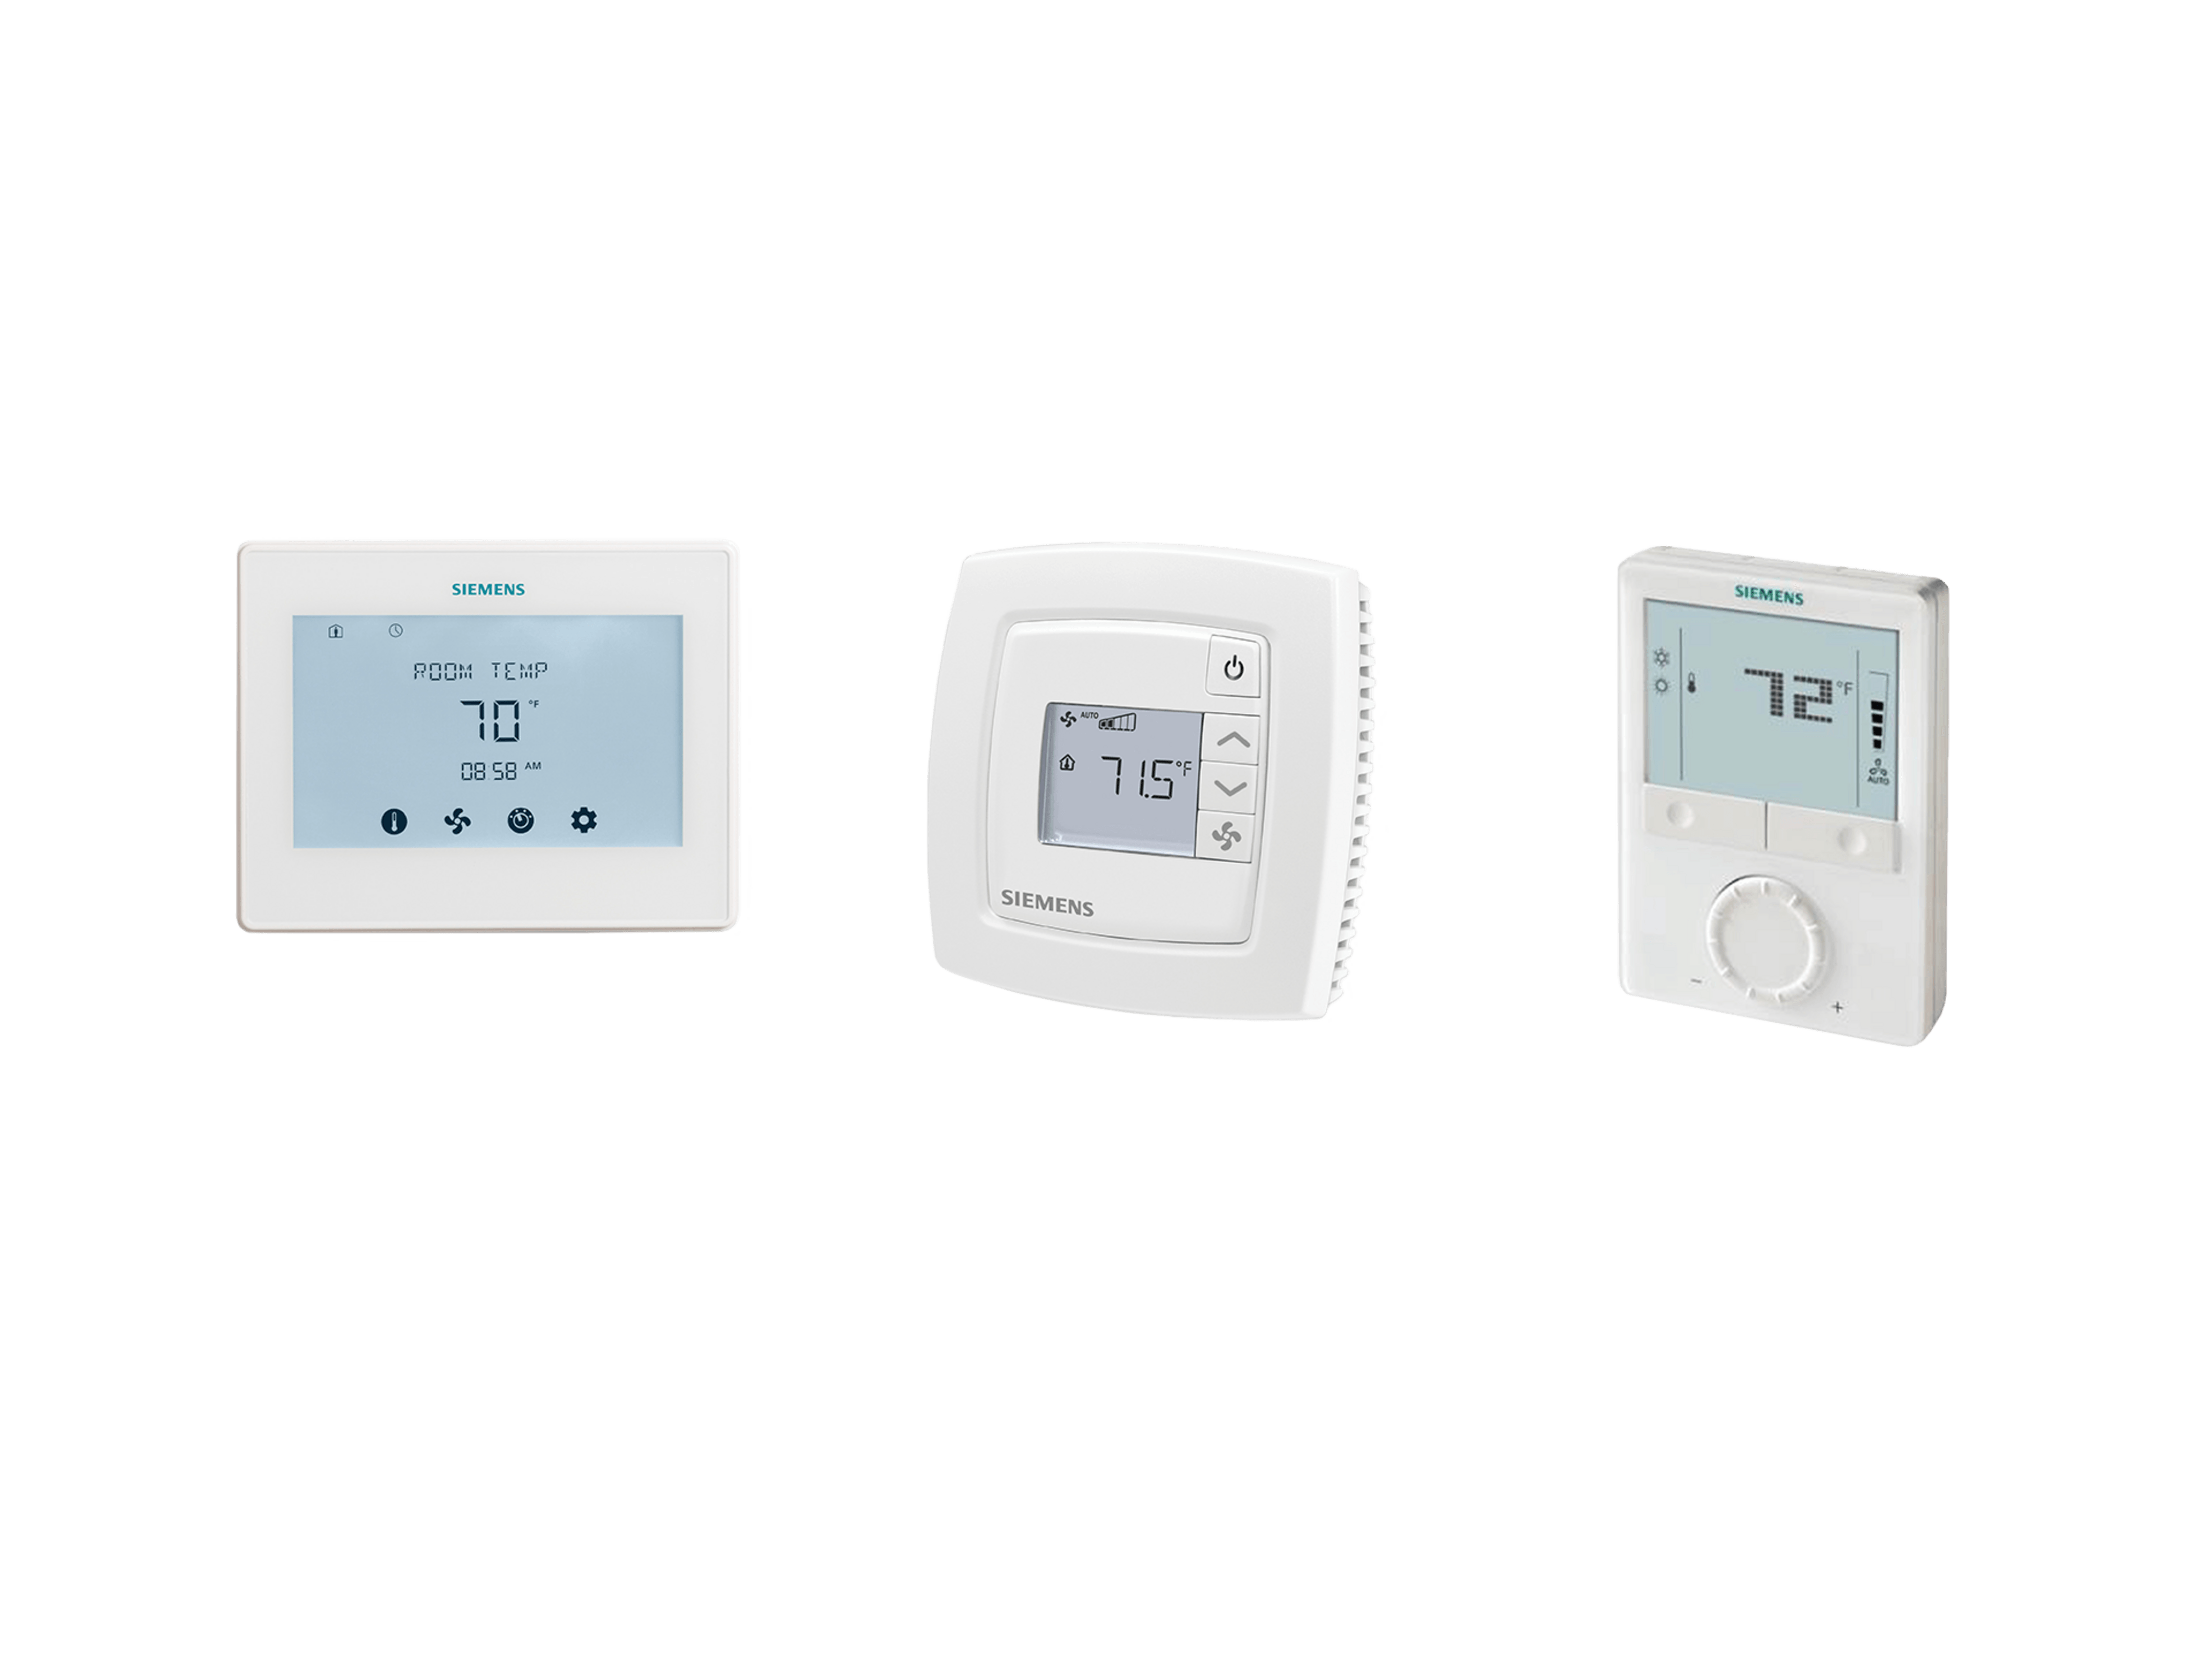 Thermostats for high performance building operation & management - HVAC  products - Siemens Global Website